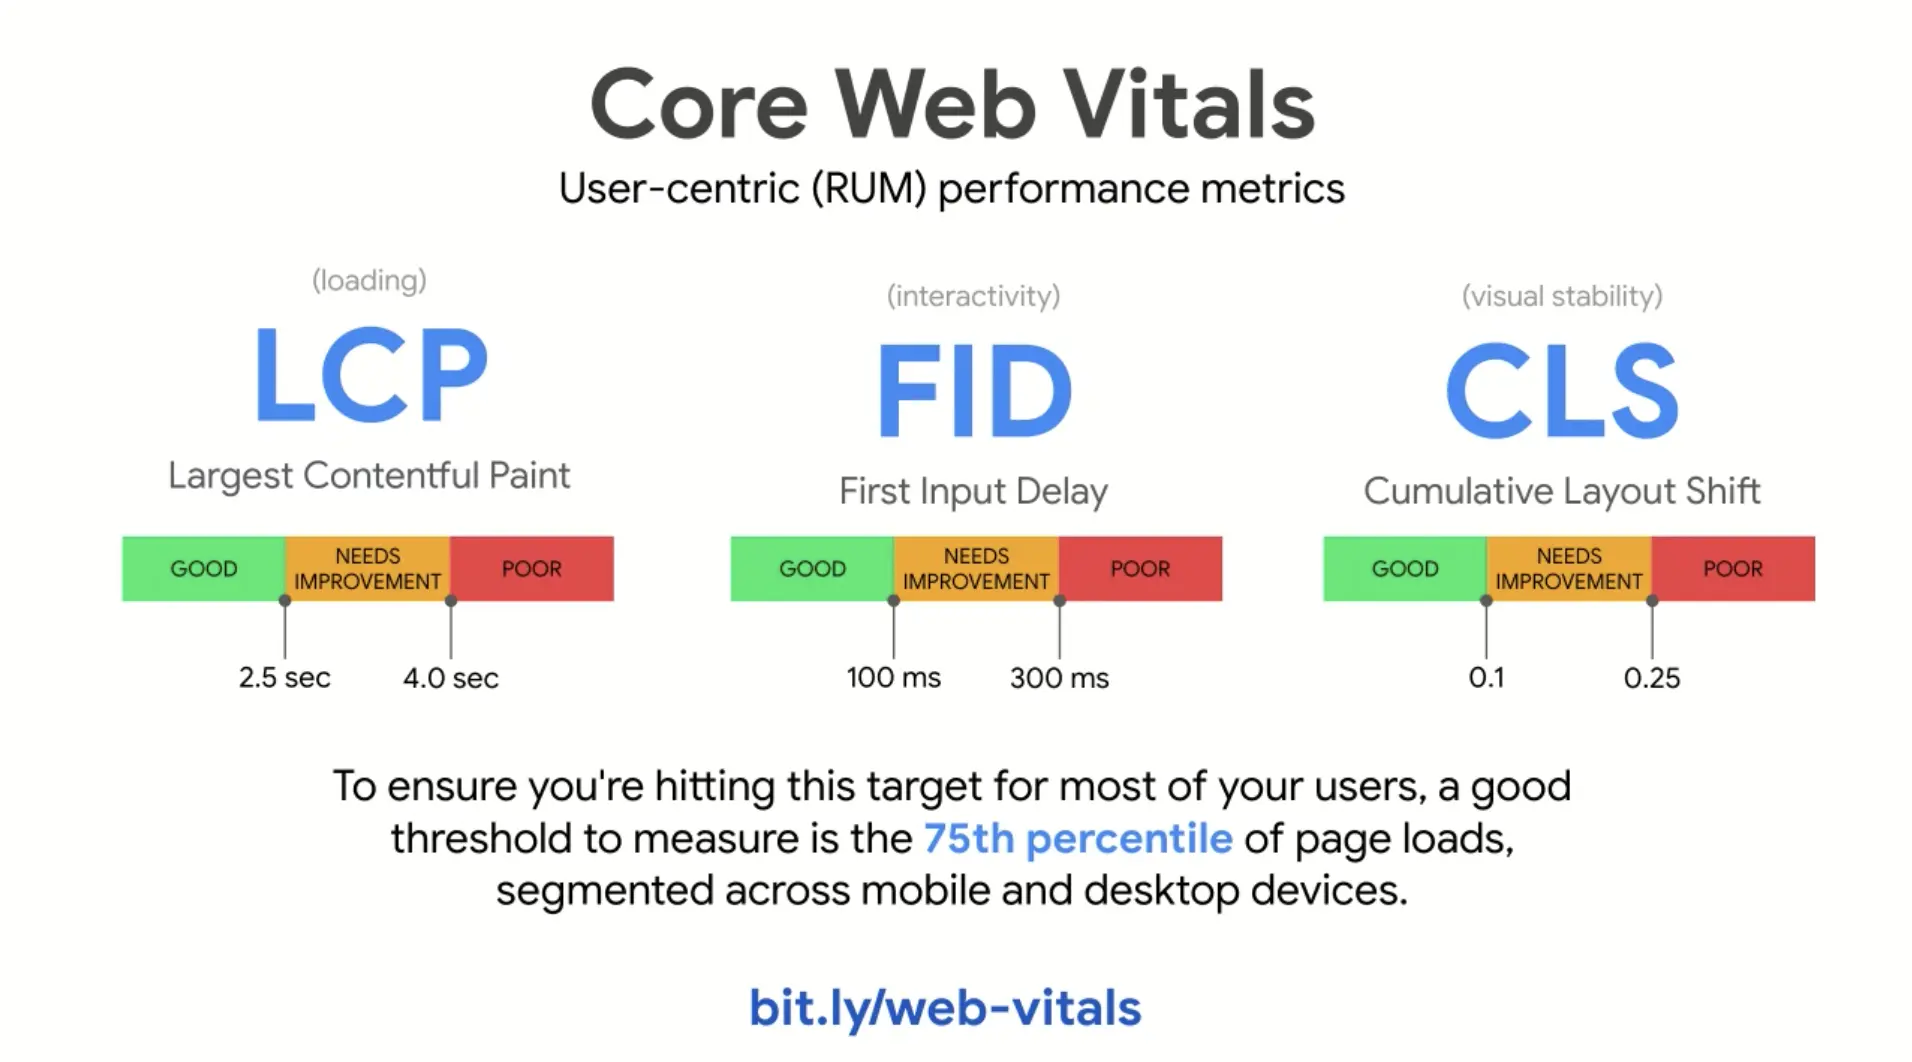 A diagram showing the three components of the Core Web Vitals metrics.